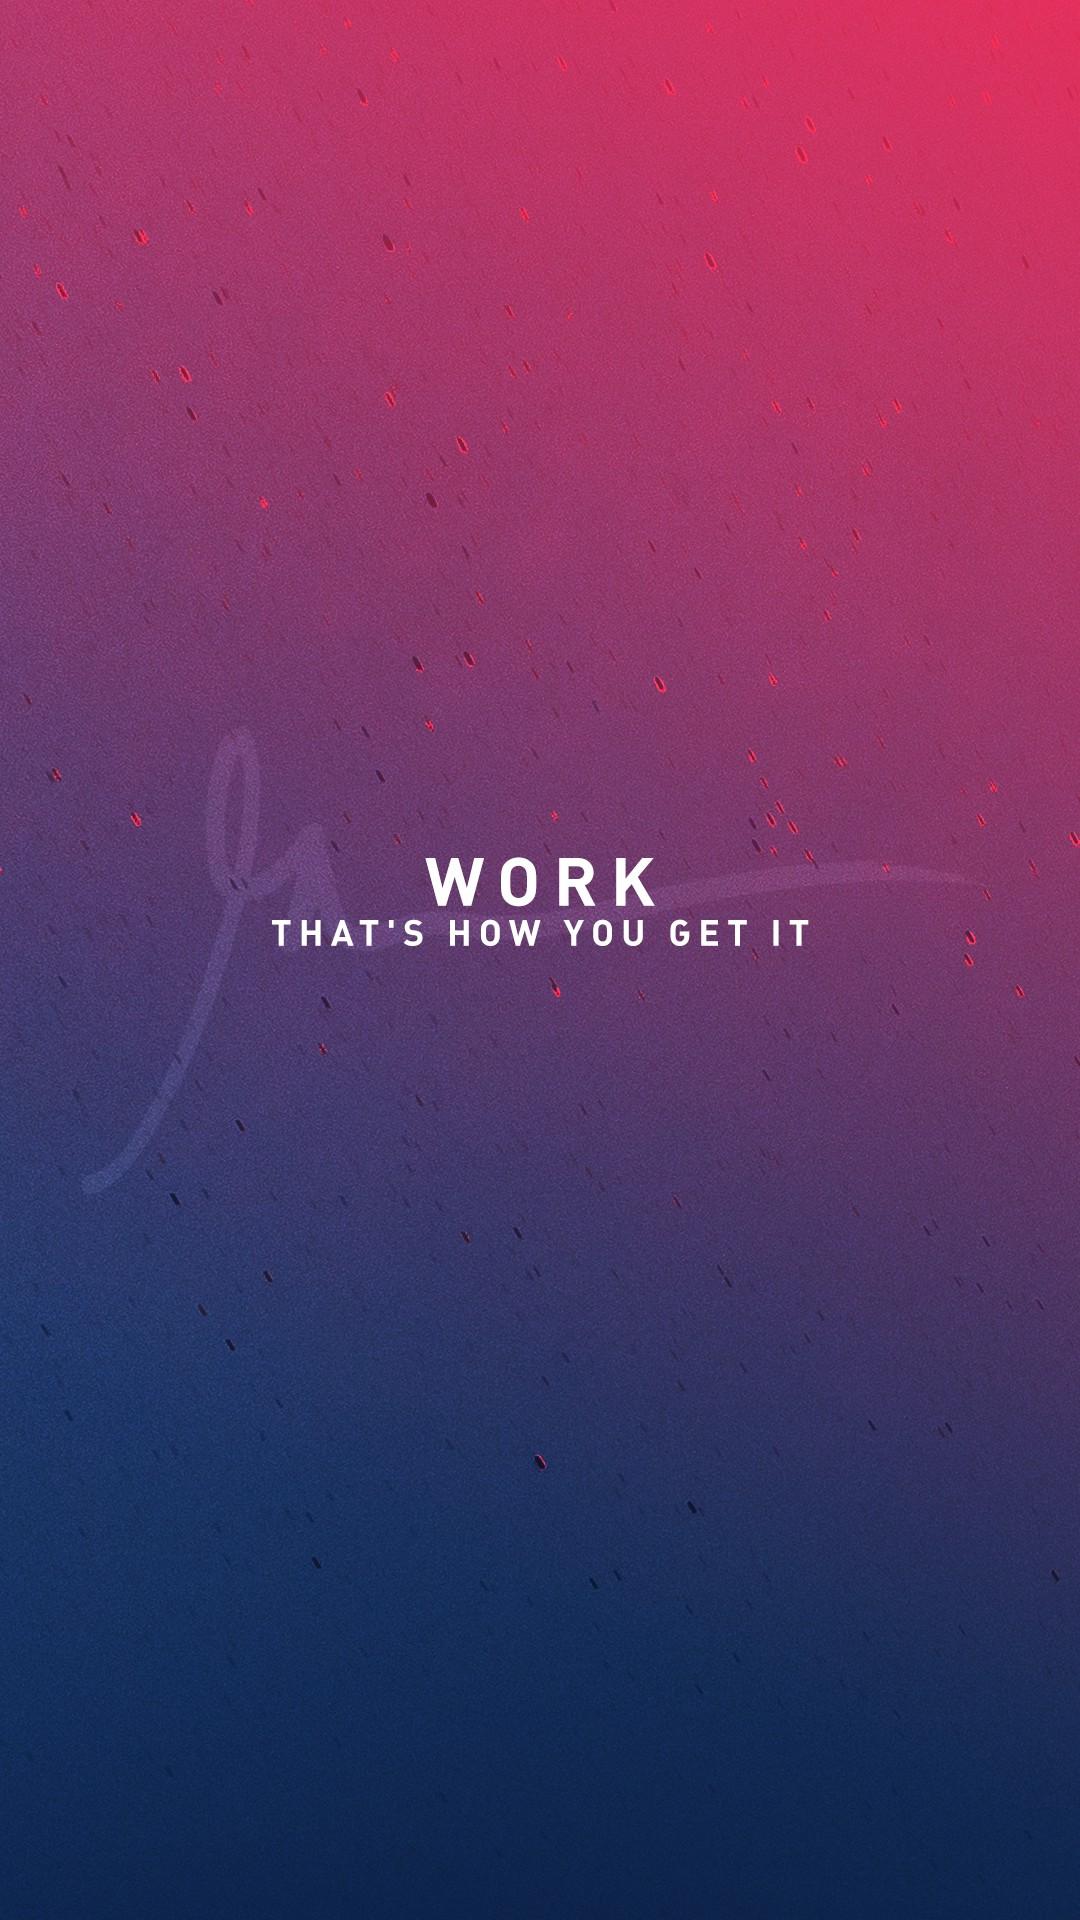 GaryVee WallPapers. Many of you have been asking me for the.